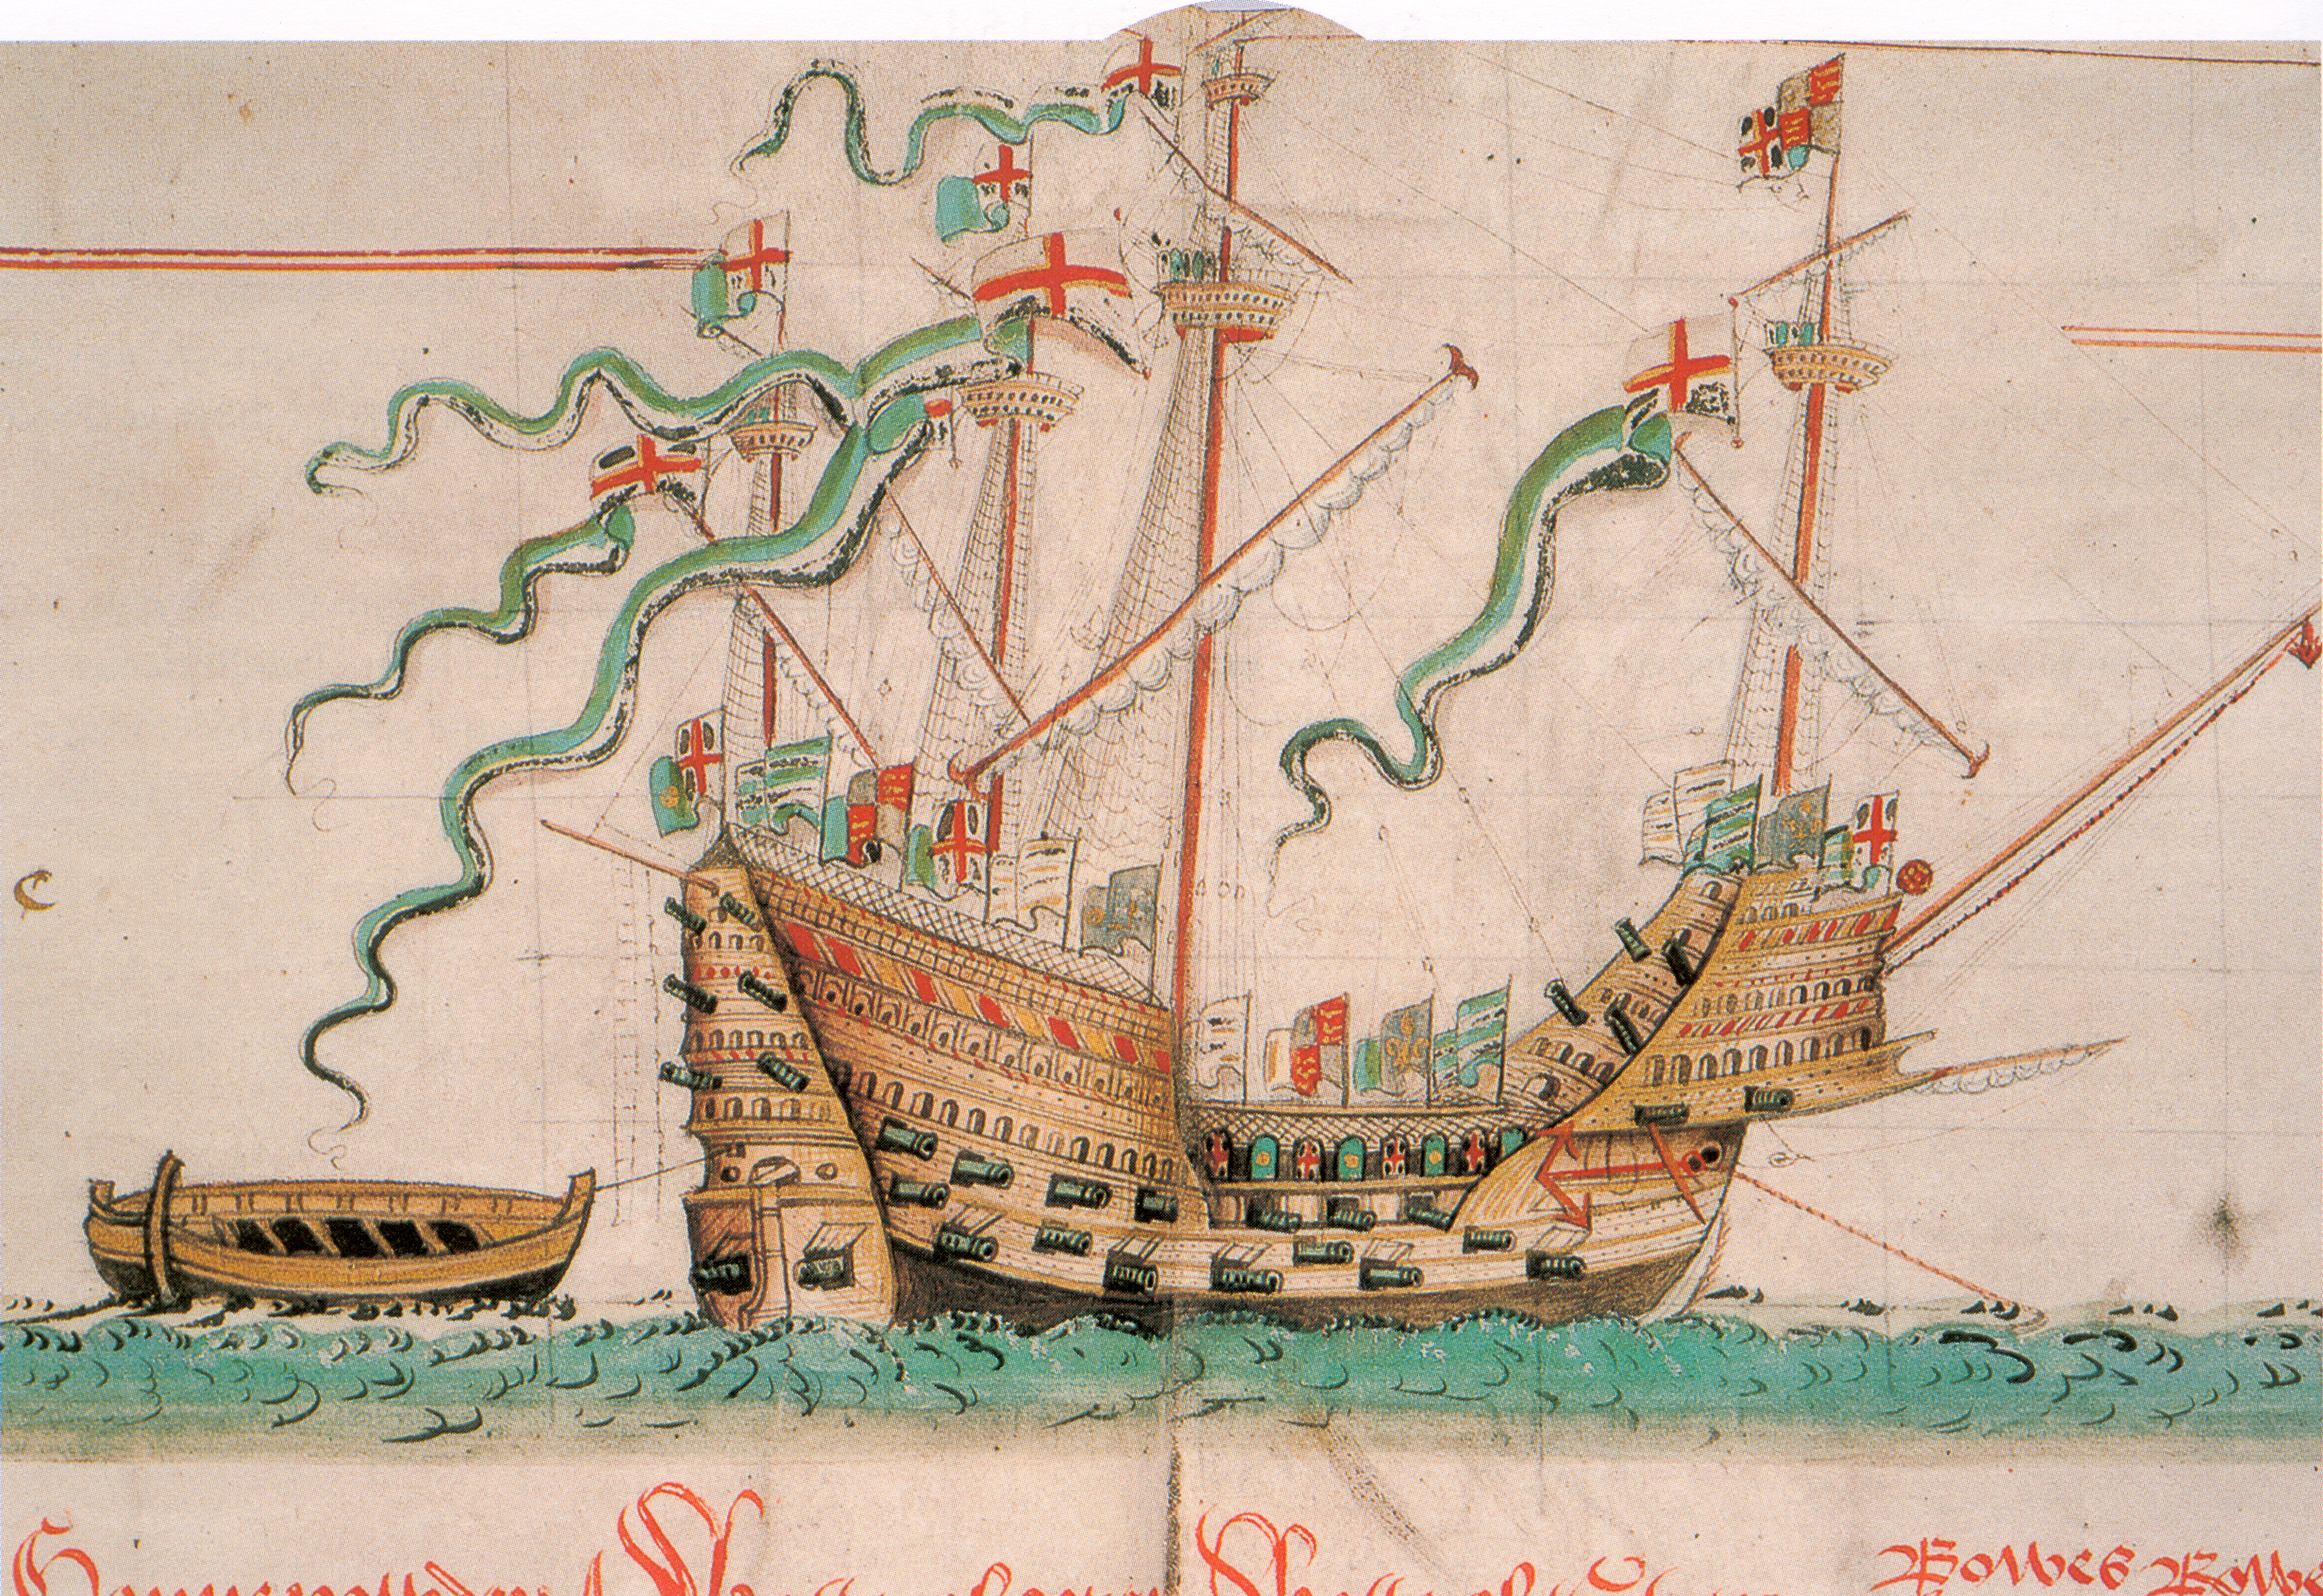 Illustration of the Mary Rose from the Anthony Roll